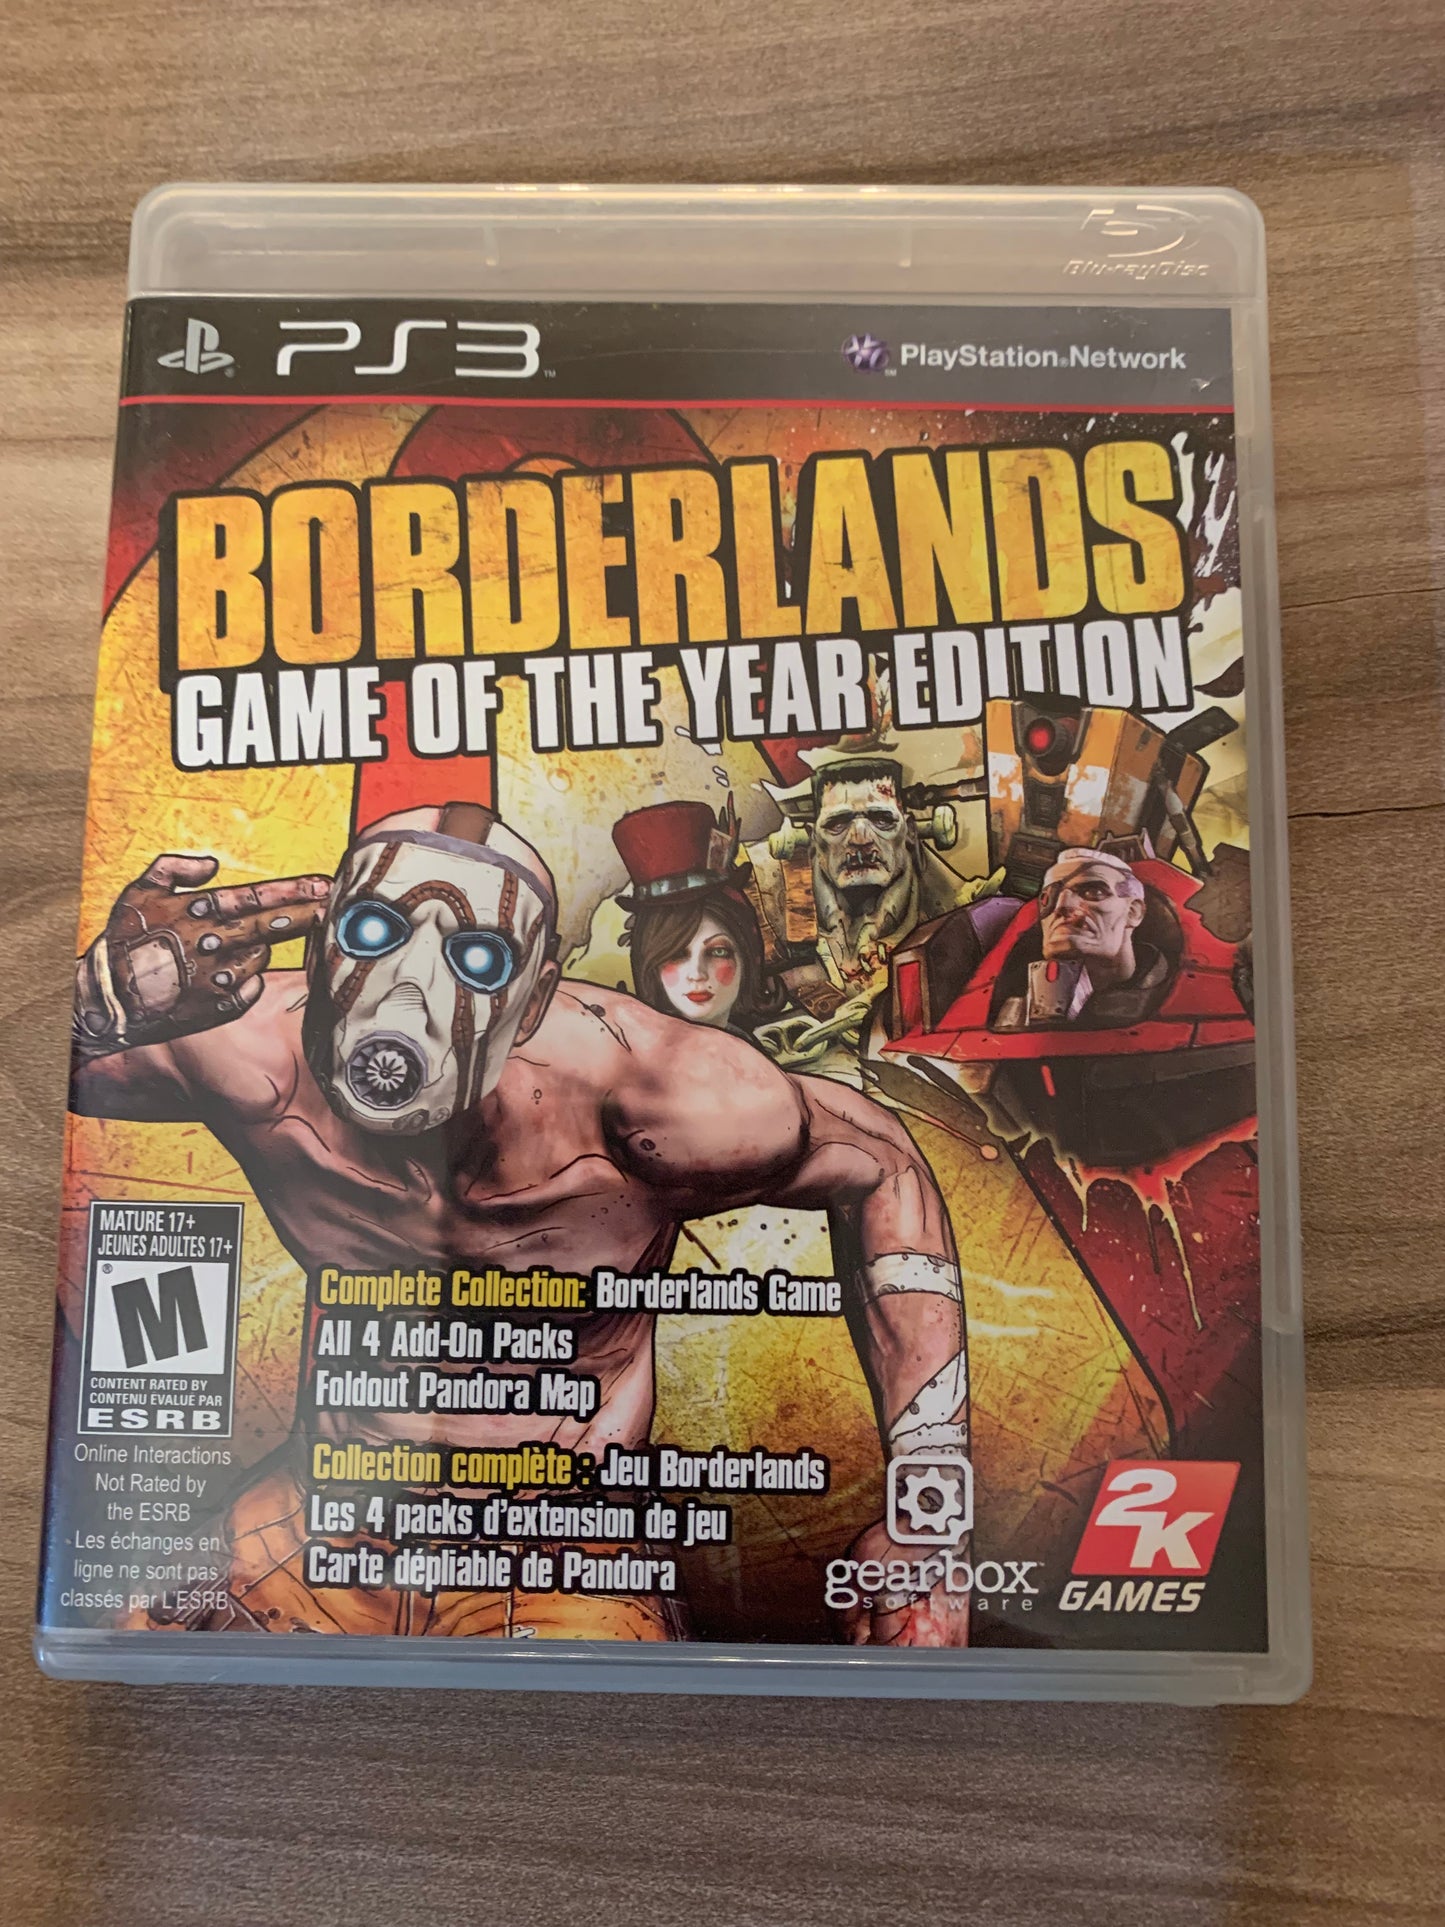 PiXEL-RETRO.COM : SONY PLAYSTATION 3 PS3 BORDERLANDS GAME OF THE YEAR EDITION GAME BOX NTSC